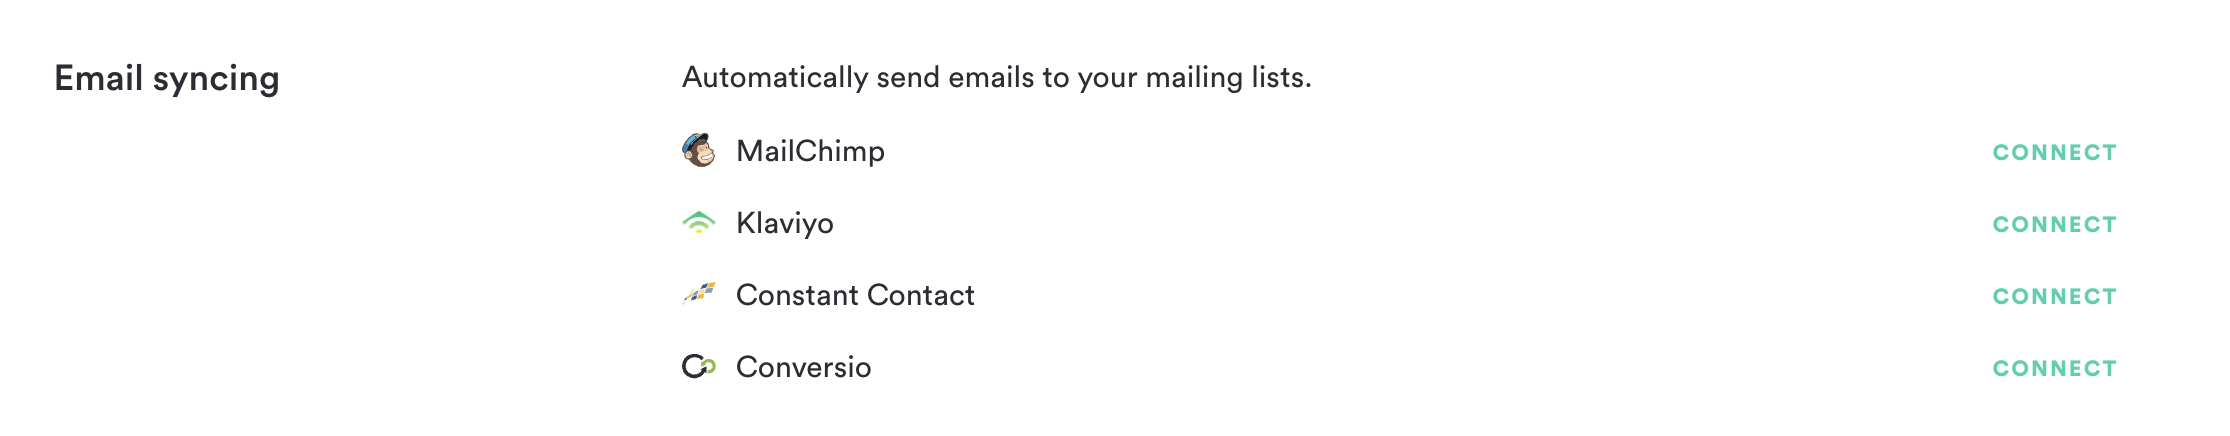 Email syncing options on Pixelpop's account page.